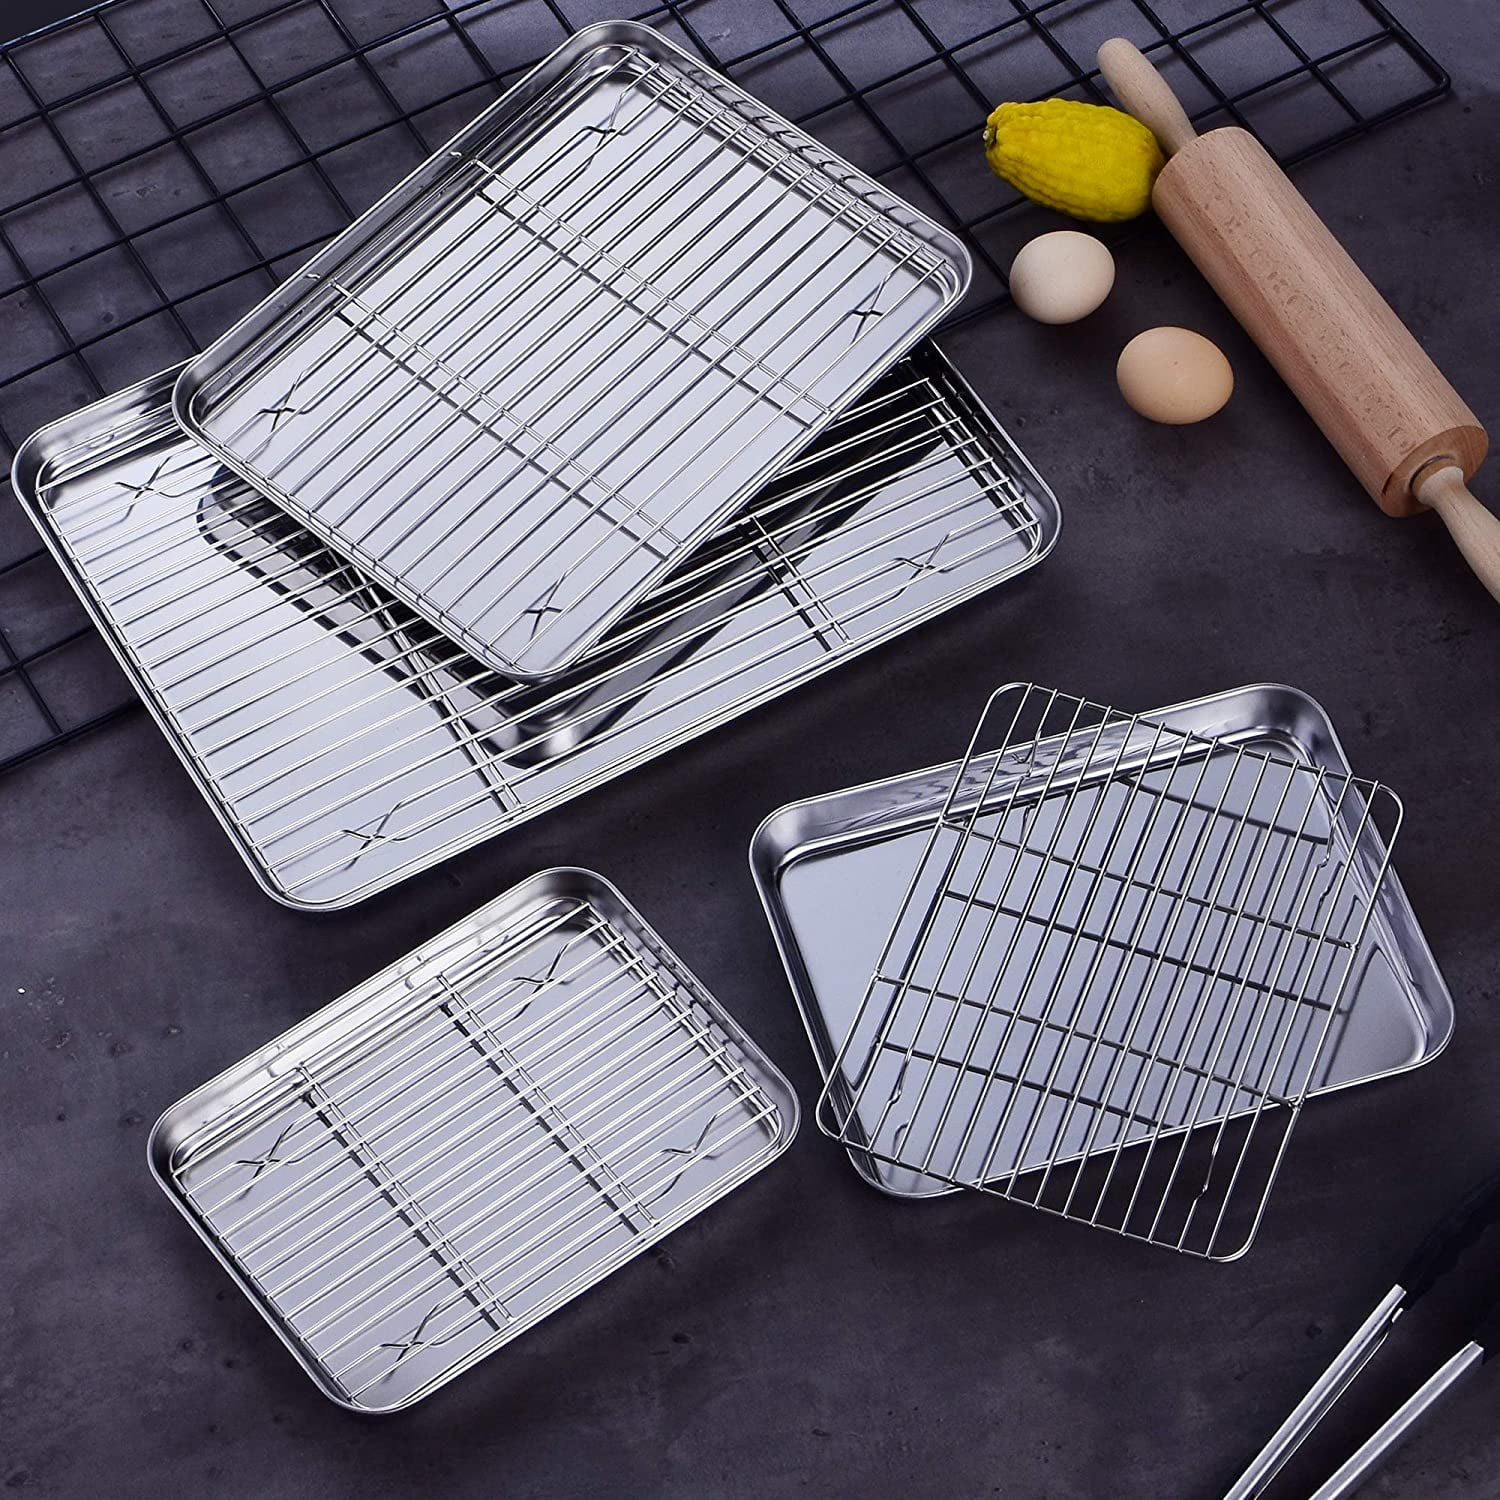 Easy Clean & Dishwasher Safe 4 Sheets/Racks Mirror Finish & Rust Free Cookie Baking Pans Stainless Steel Bakeware with Cooling Rack Set Non Toxic & Healthy Velaze Baking Tray with Rack Set of 8